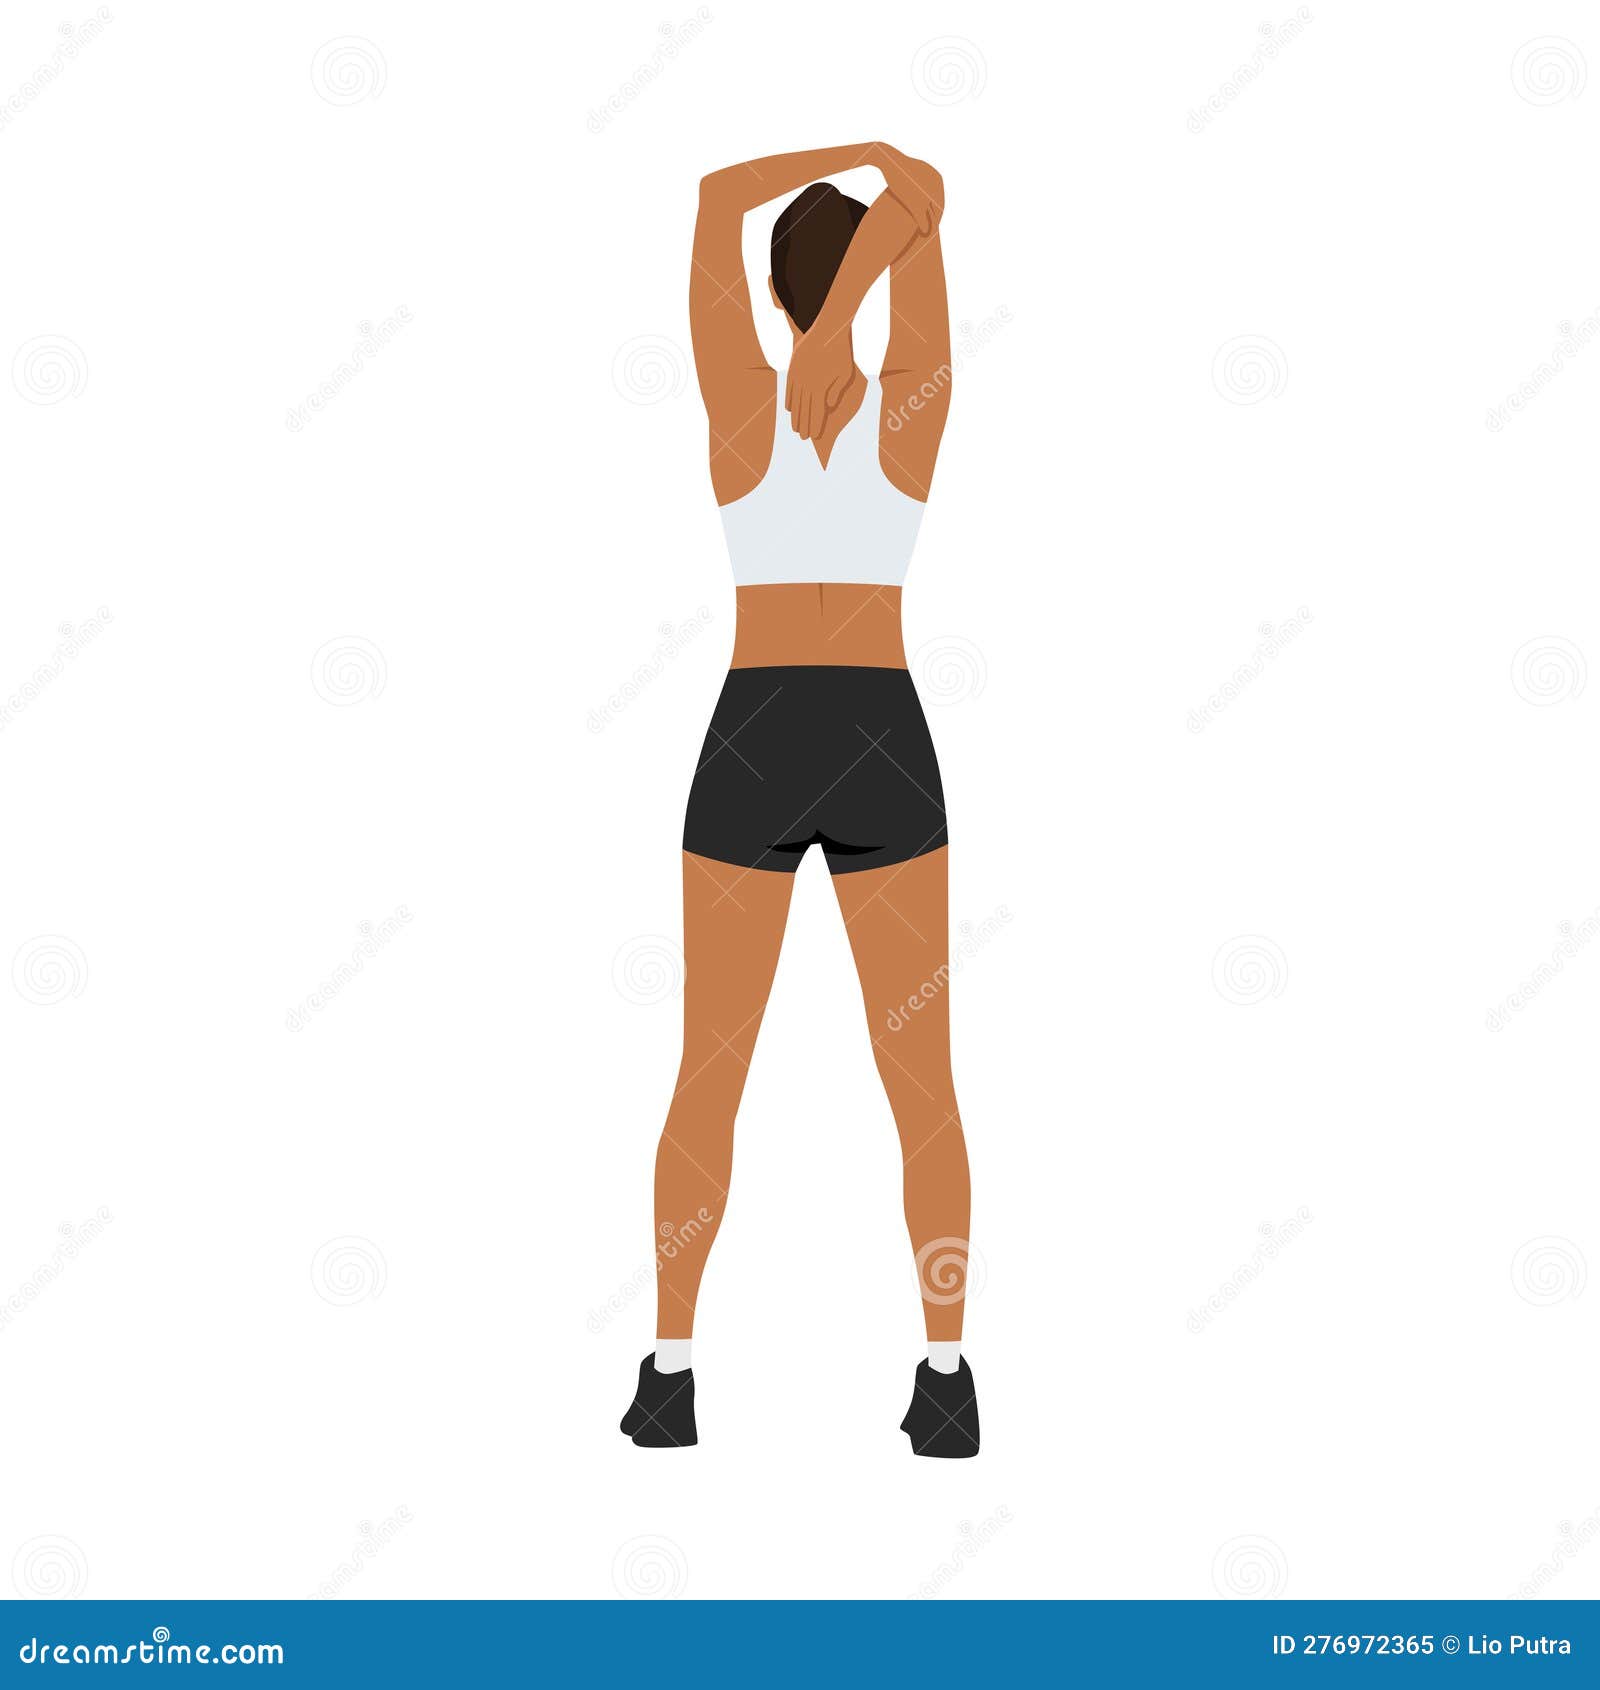 https://thumbs.dreamstime.com/z/man-doing-overhead-triceps-stretch-exercise-flat-vector-illustration-isolated-white-background-woman-doing-overhead-triceps-276972365.jpg